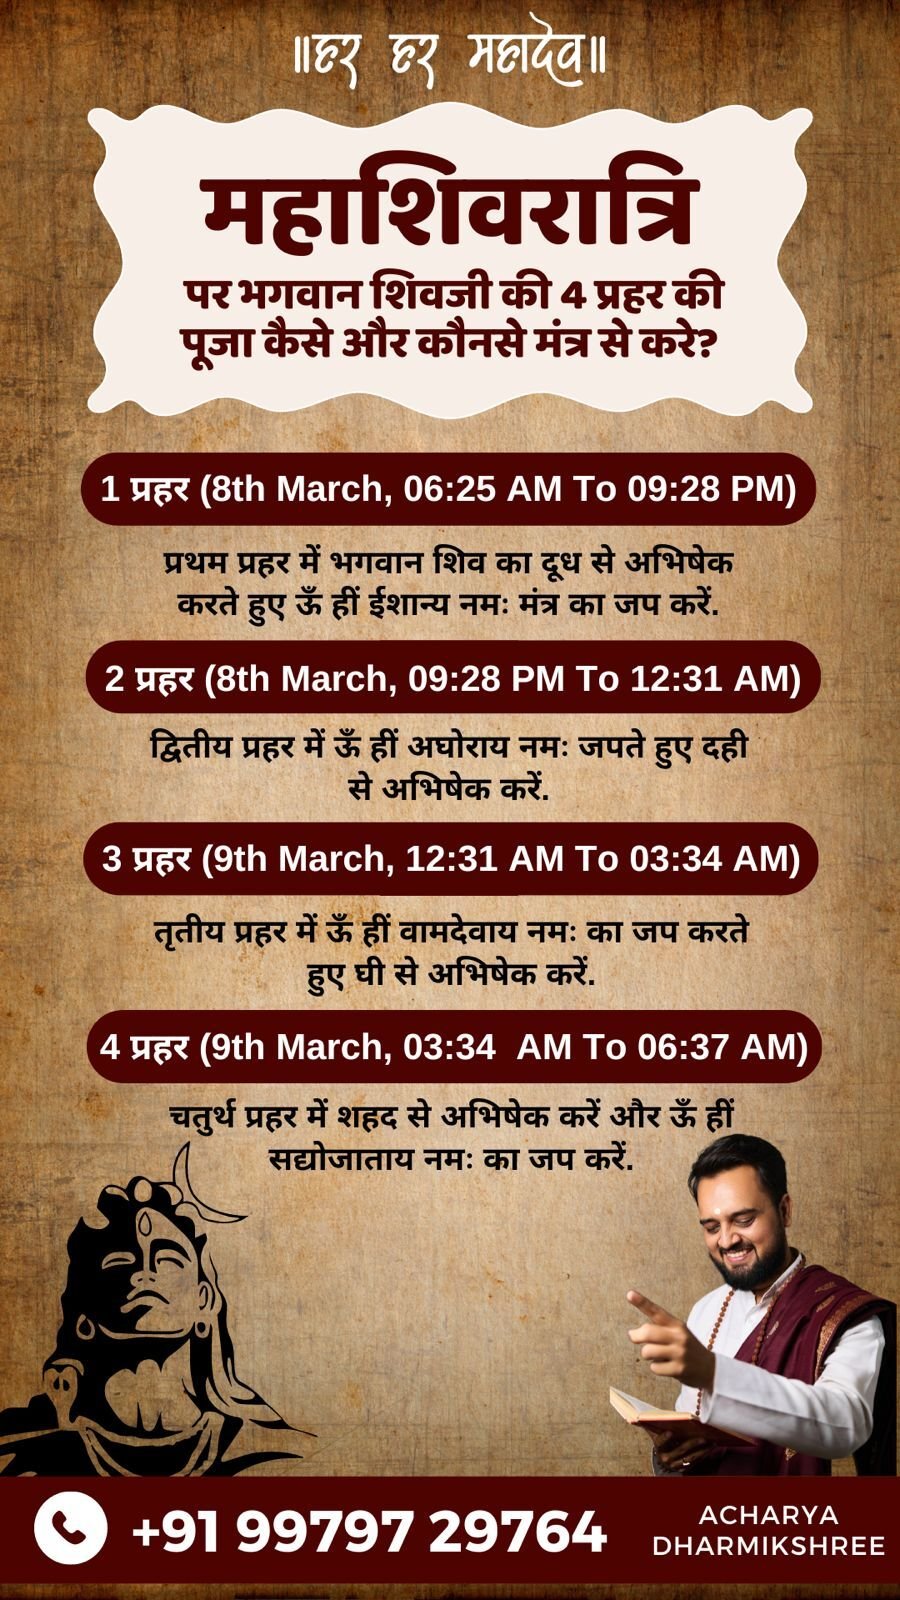 Timings and mantra/abhshekam for four rounds of prayers on Mahashivaratri